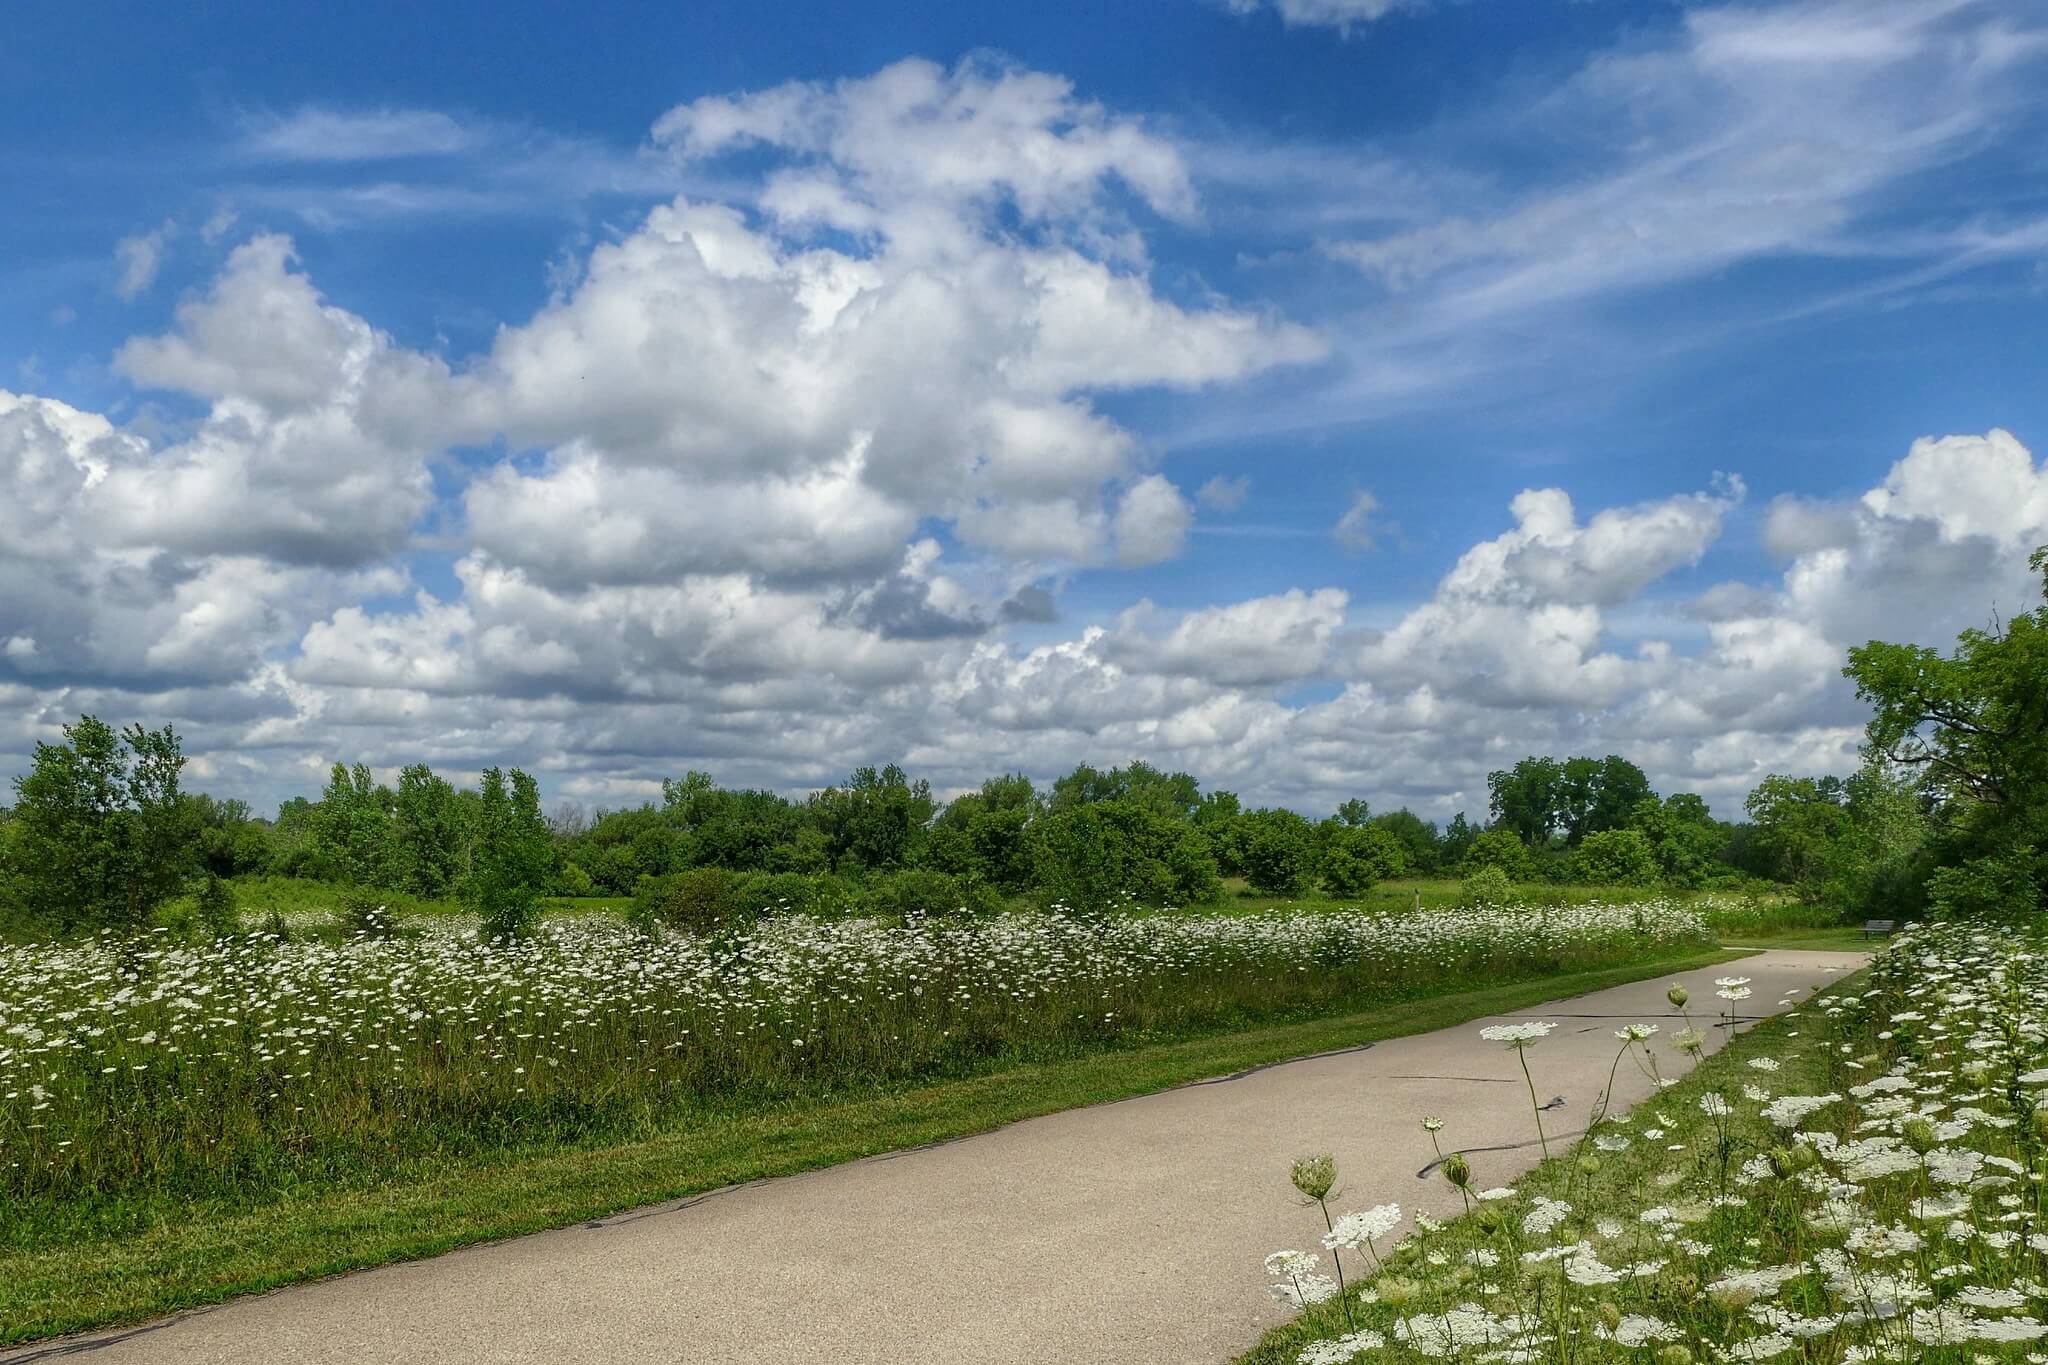 A paved bike trail in summer surrounded by fields of green grass and white flowers.